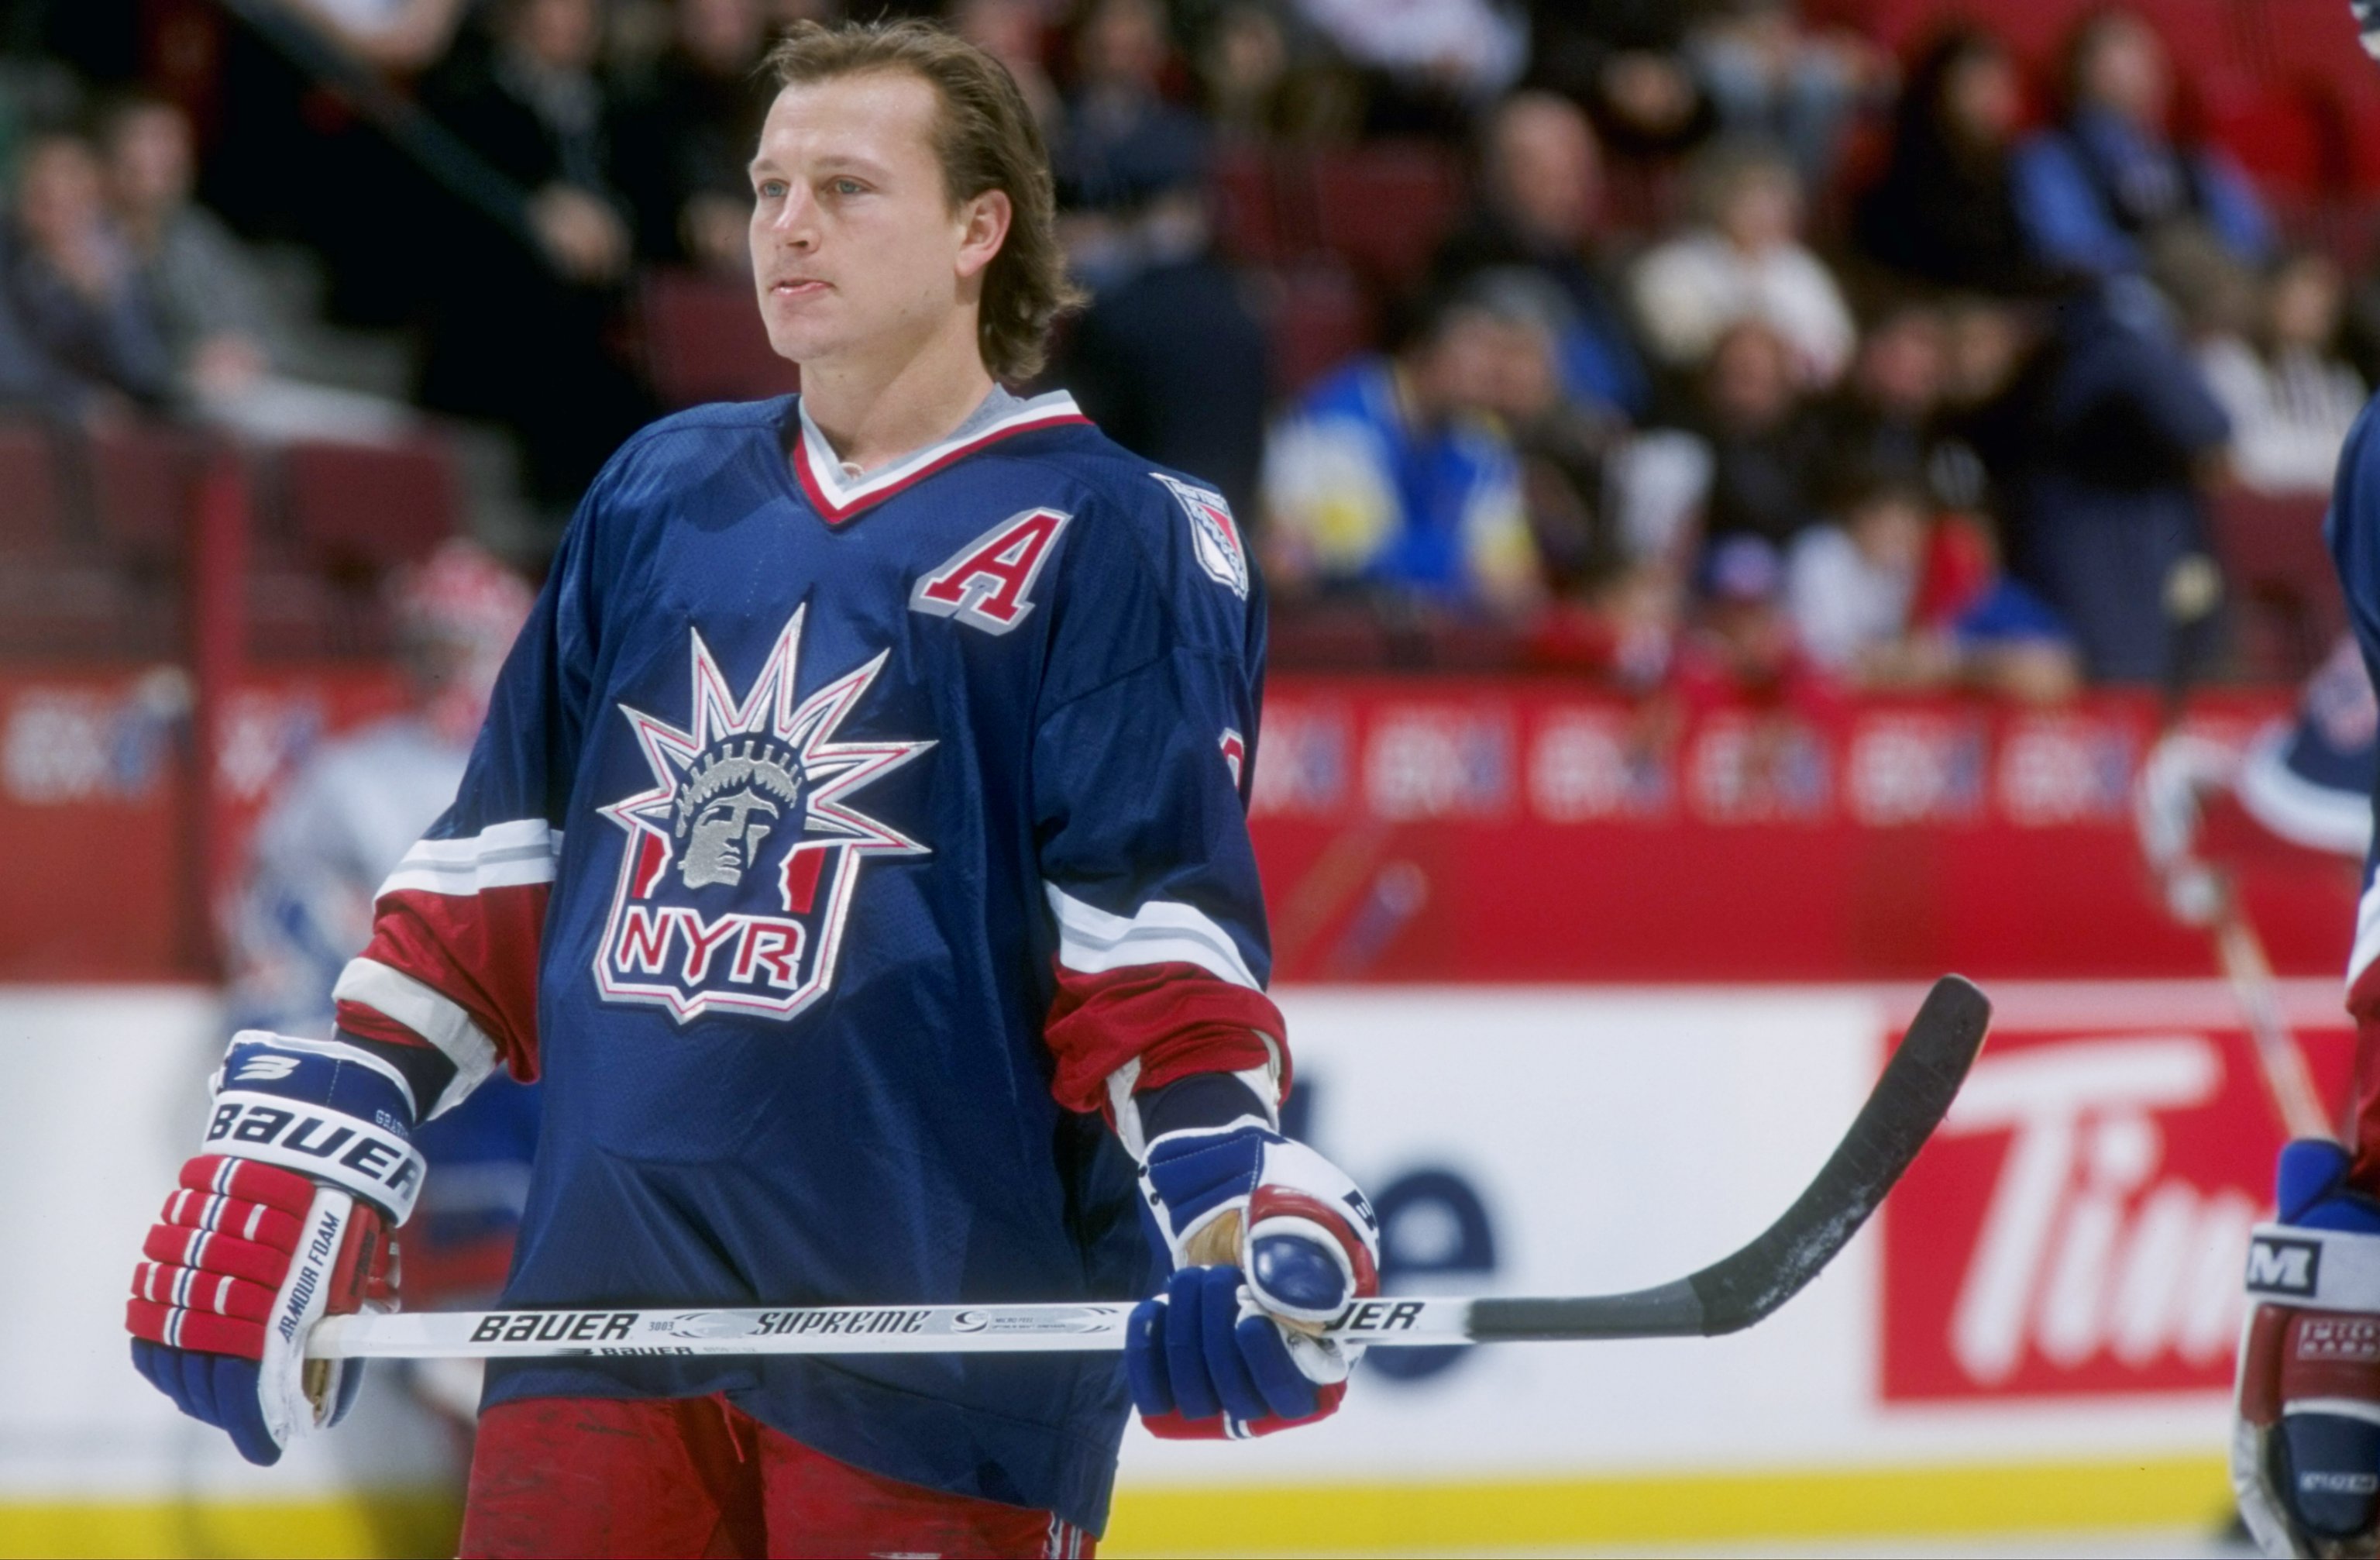 Top 5 New York Rangers Players Of All-Time